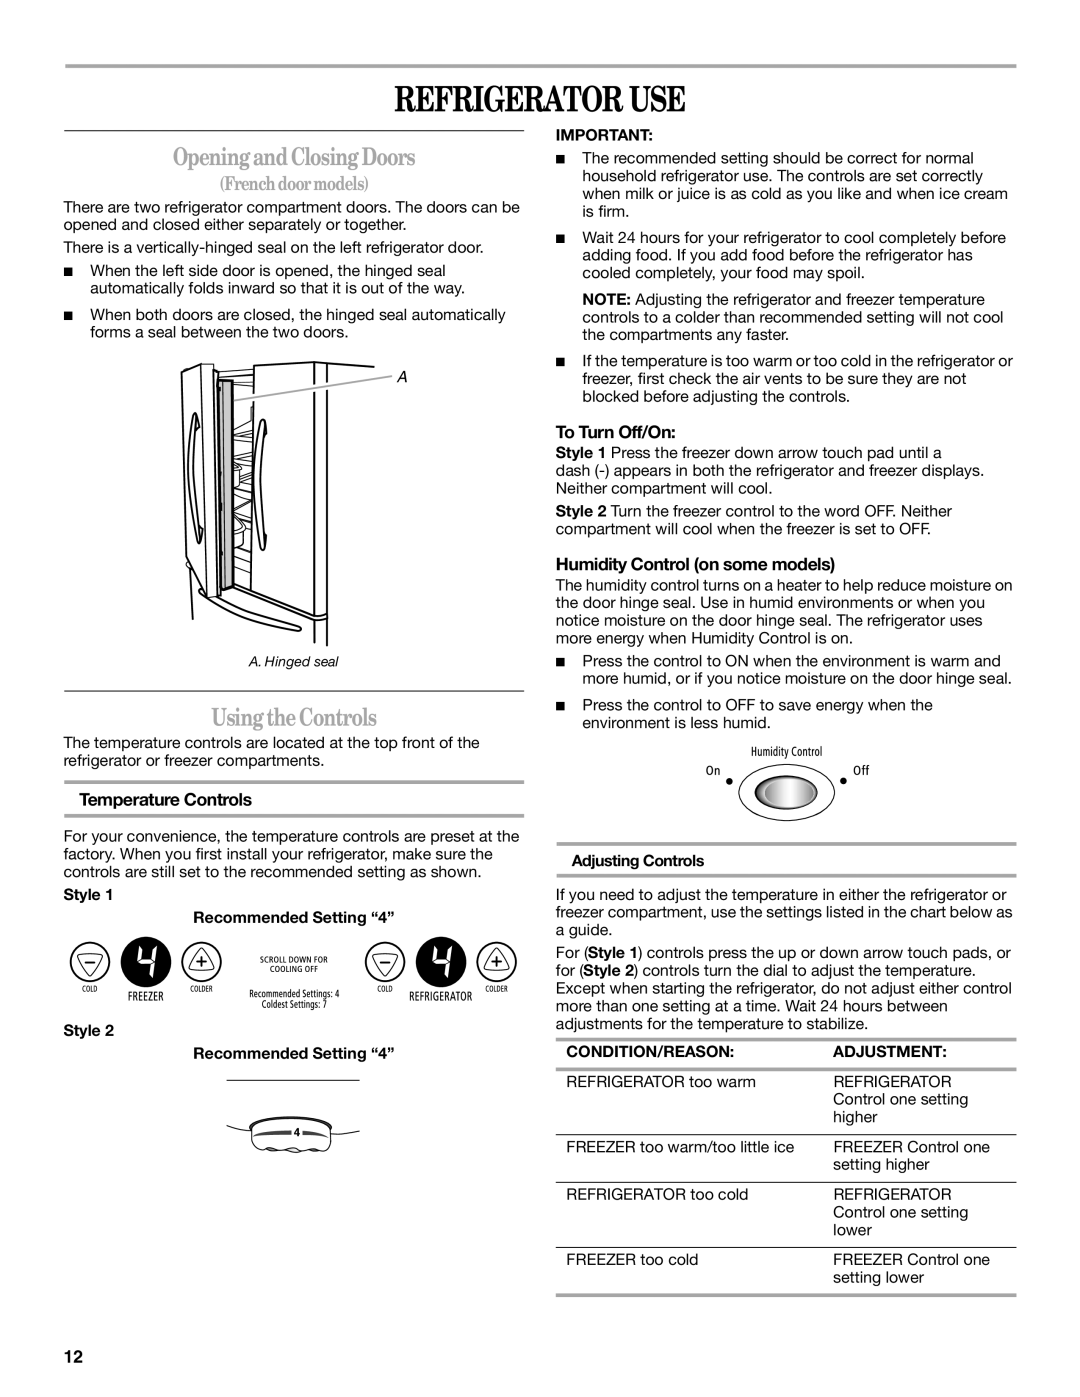 Whirlpool W10175448A Refrigerator Use, Opening and Closing Doors, Using the Controls, French doormodels, To Turn Off/On 